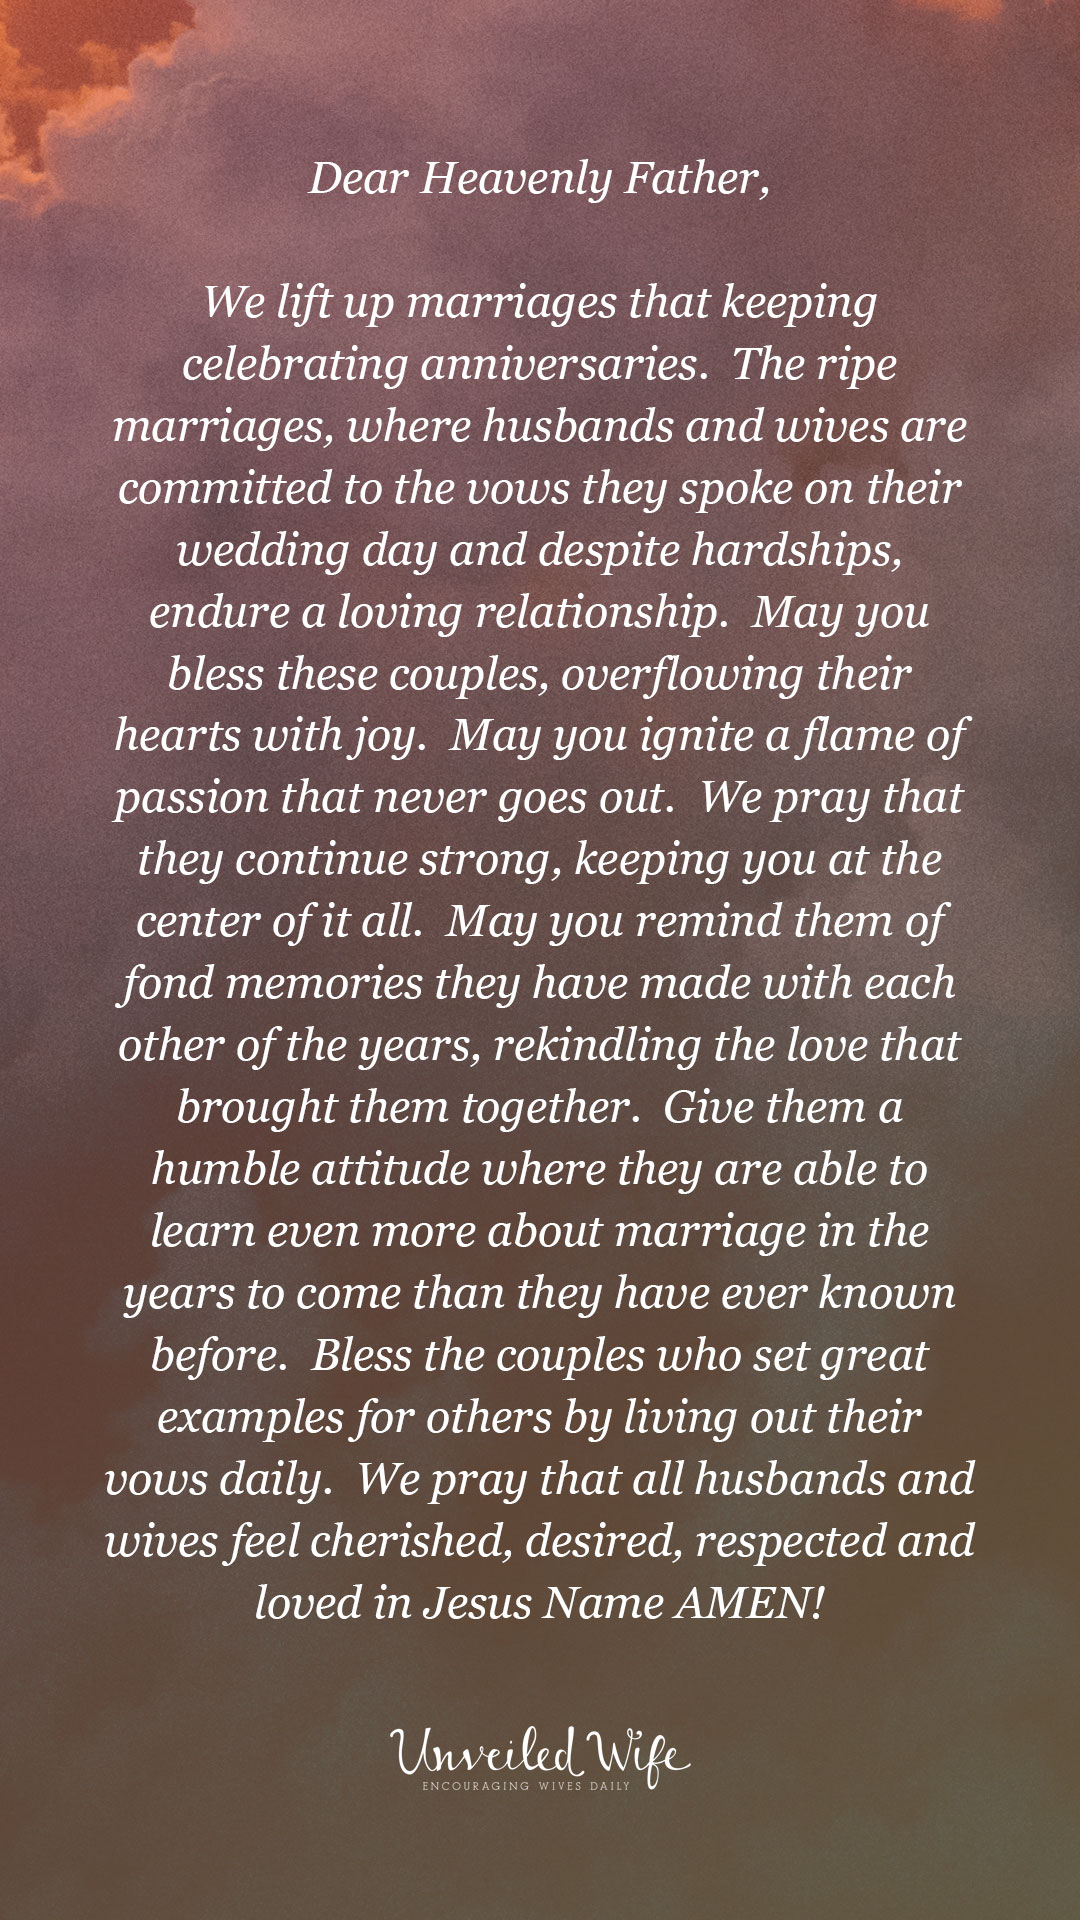 Prayer Of The Day : Ripe Marriages